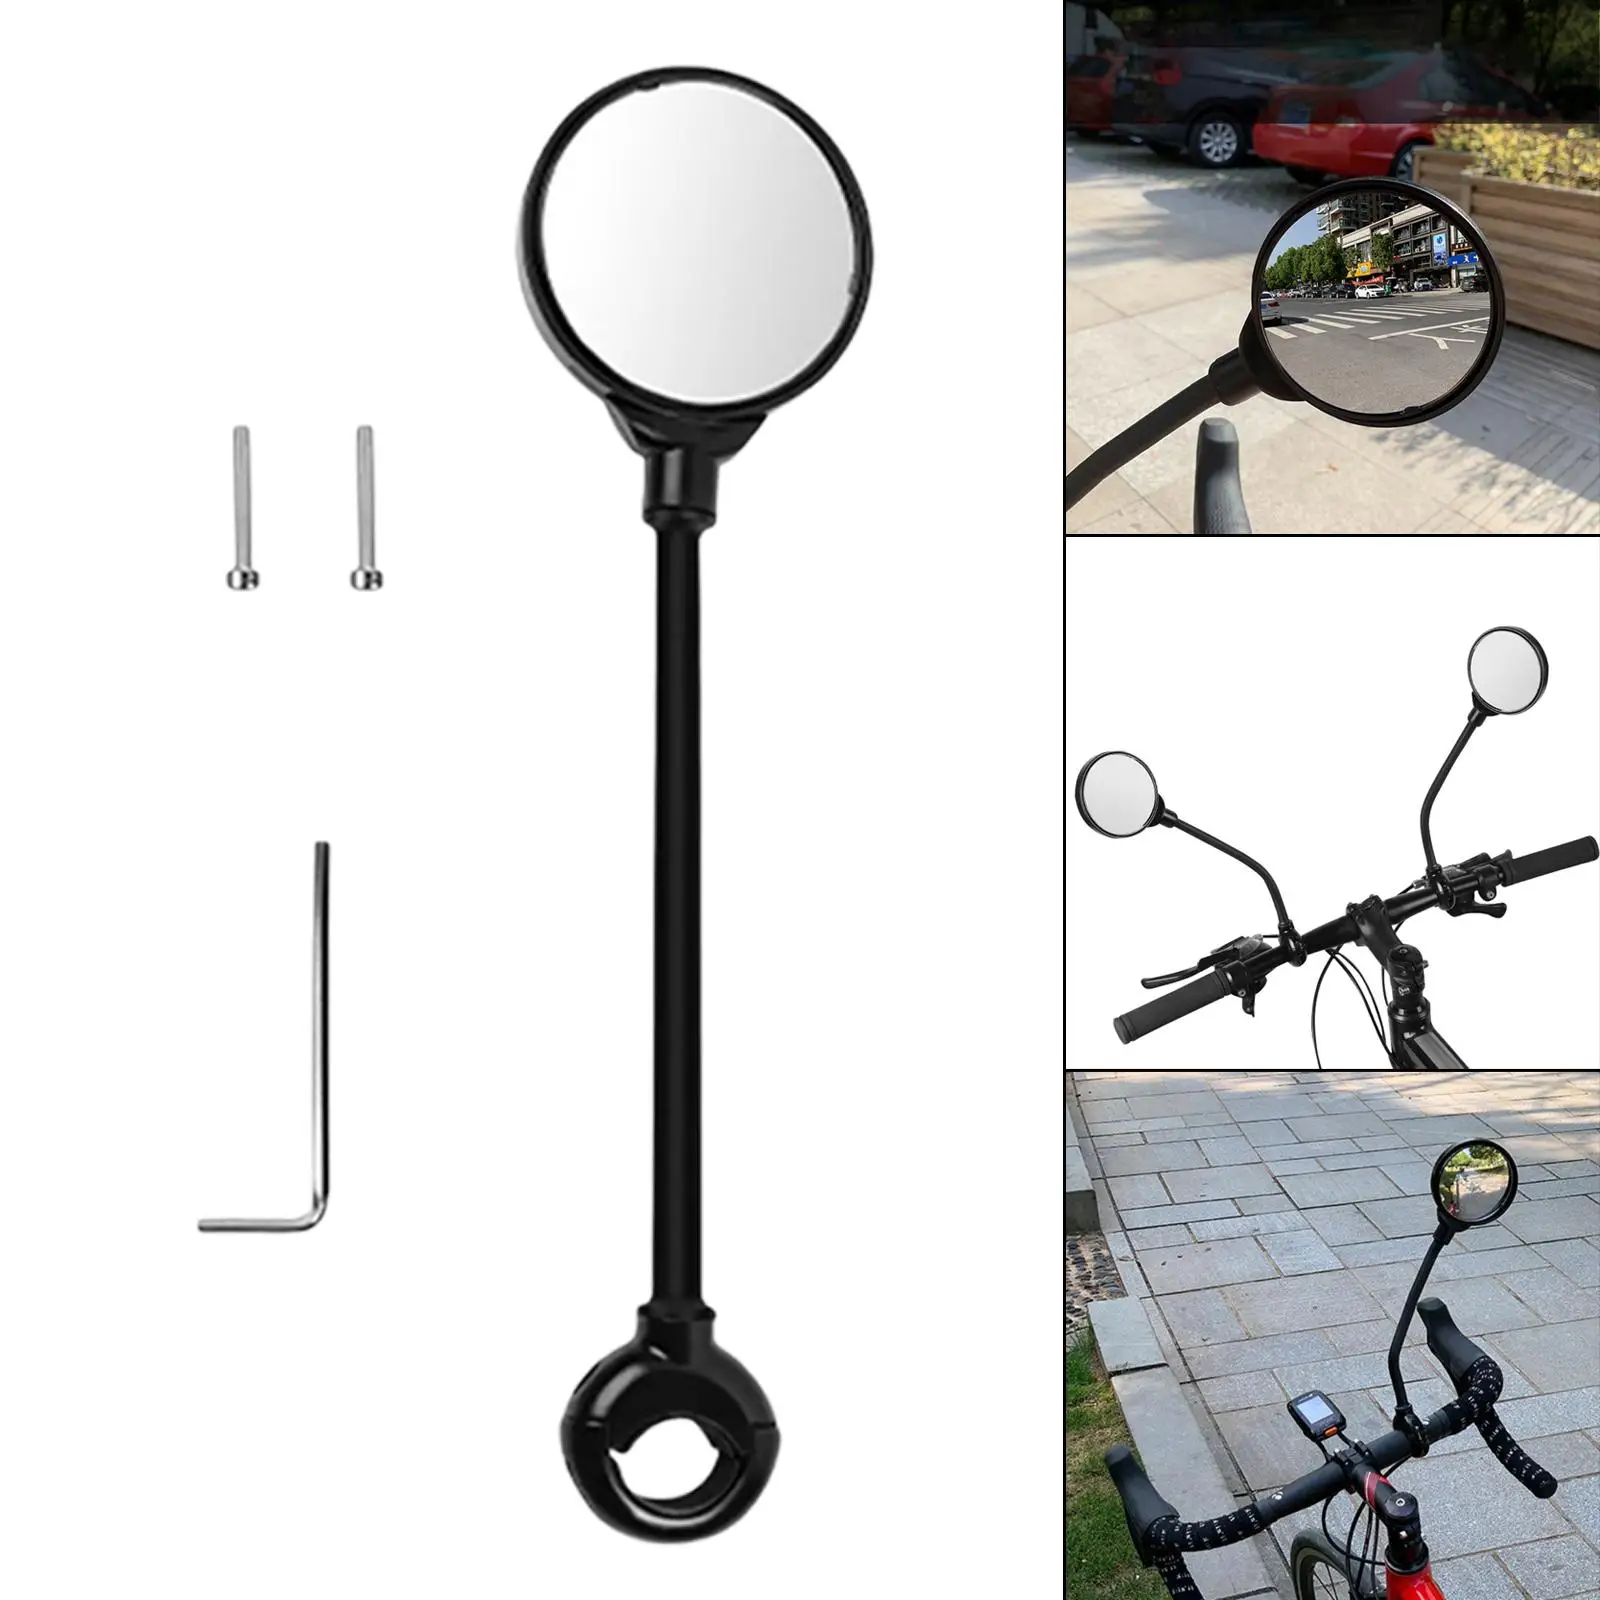 Flexible Bicycle Rear View Mirror 360 Rotatable Adjustable Left Right